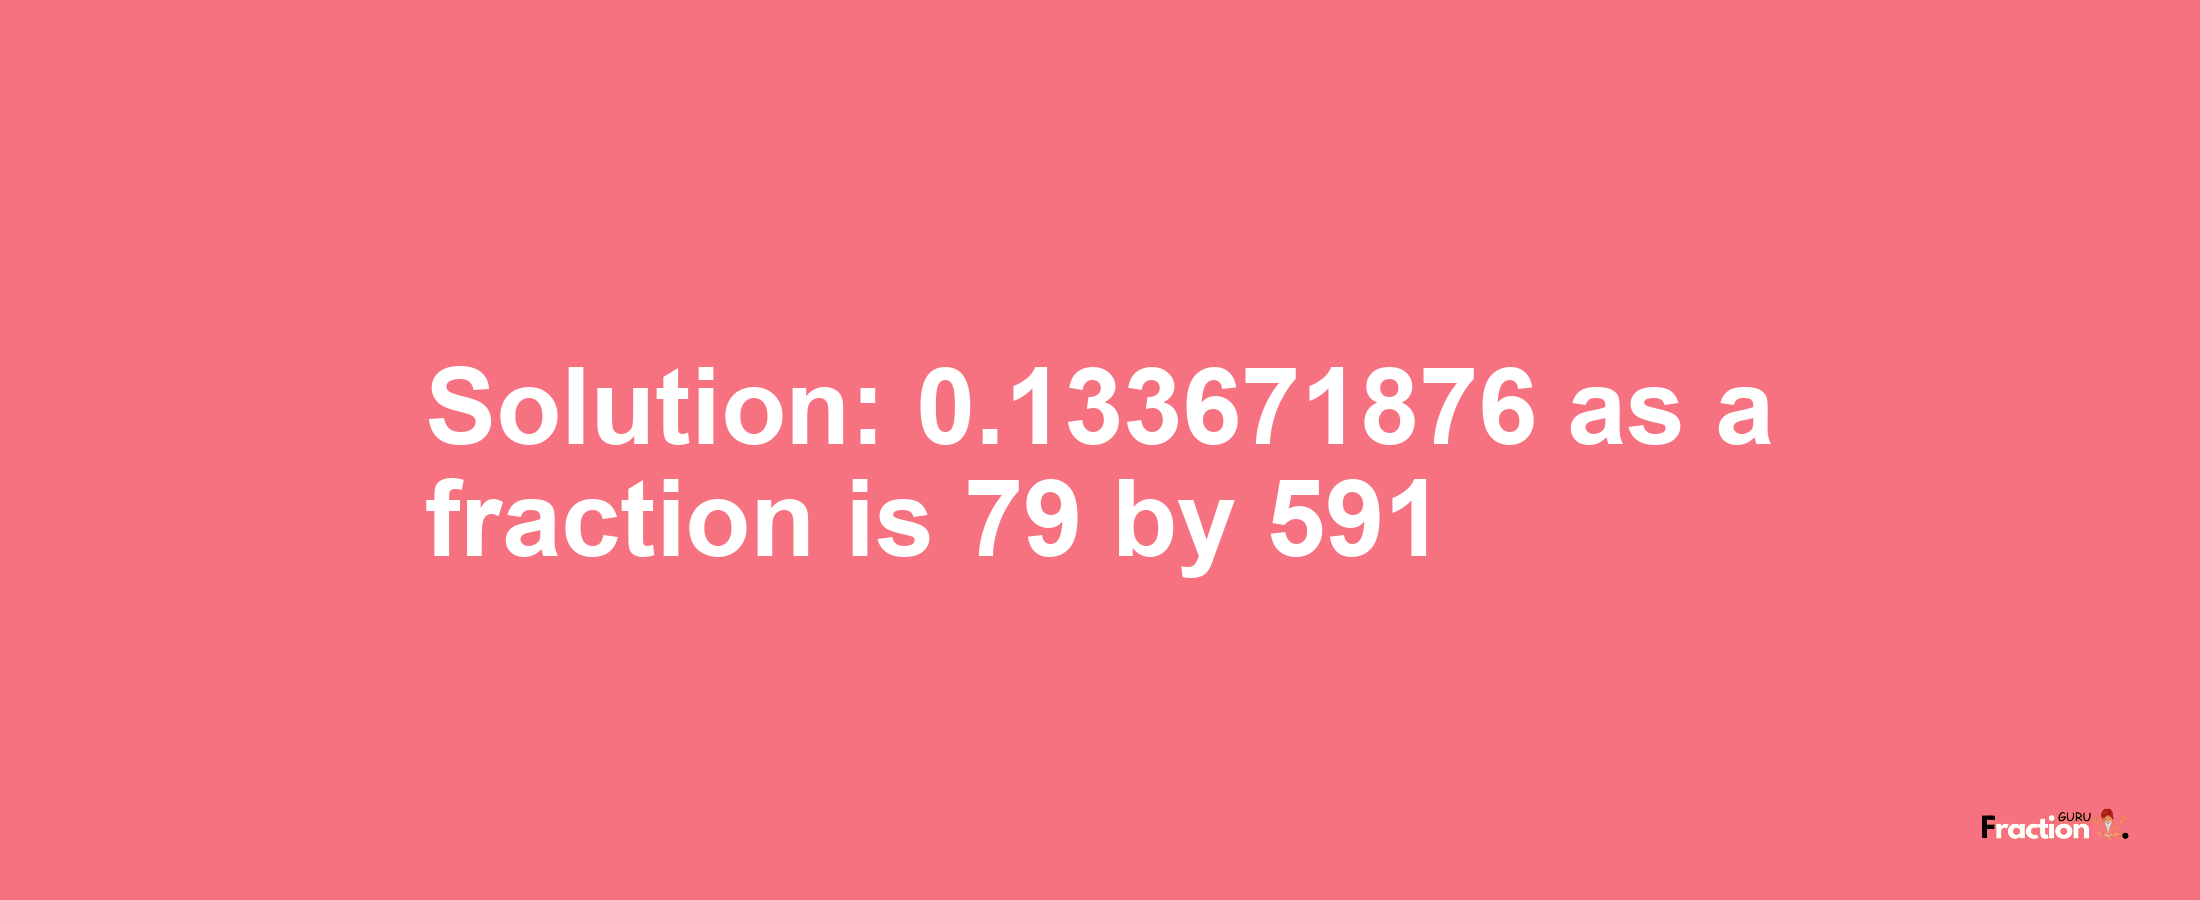 Solution:0.133671876 as a fraction is 79/591